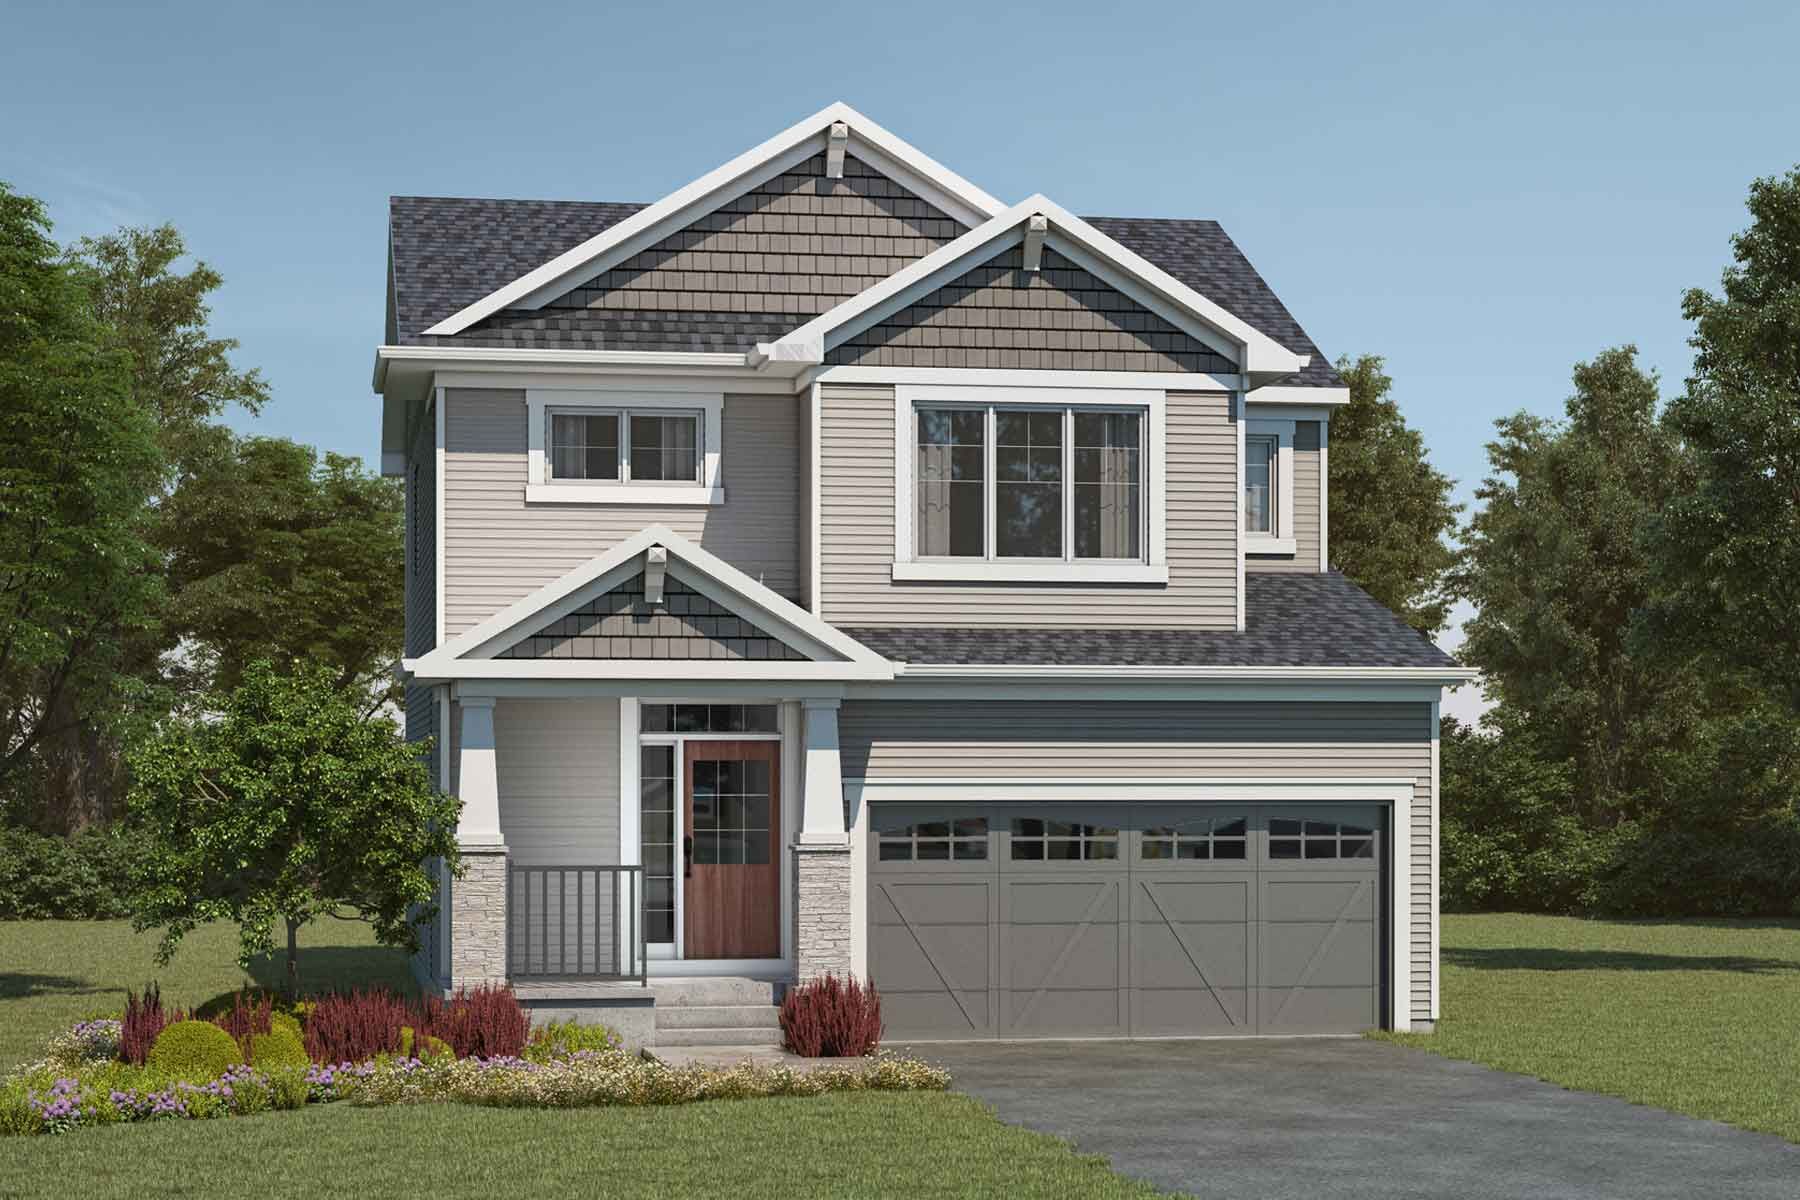 A single family Craftsman style home with a double car garage.